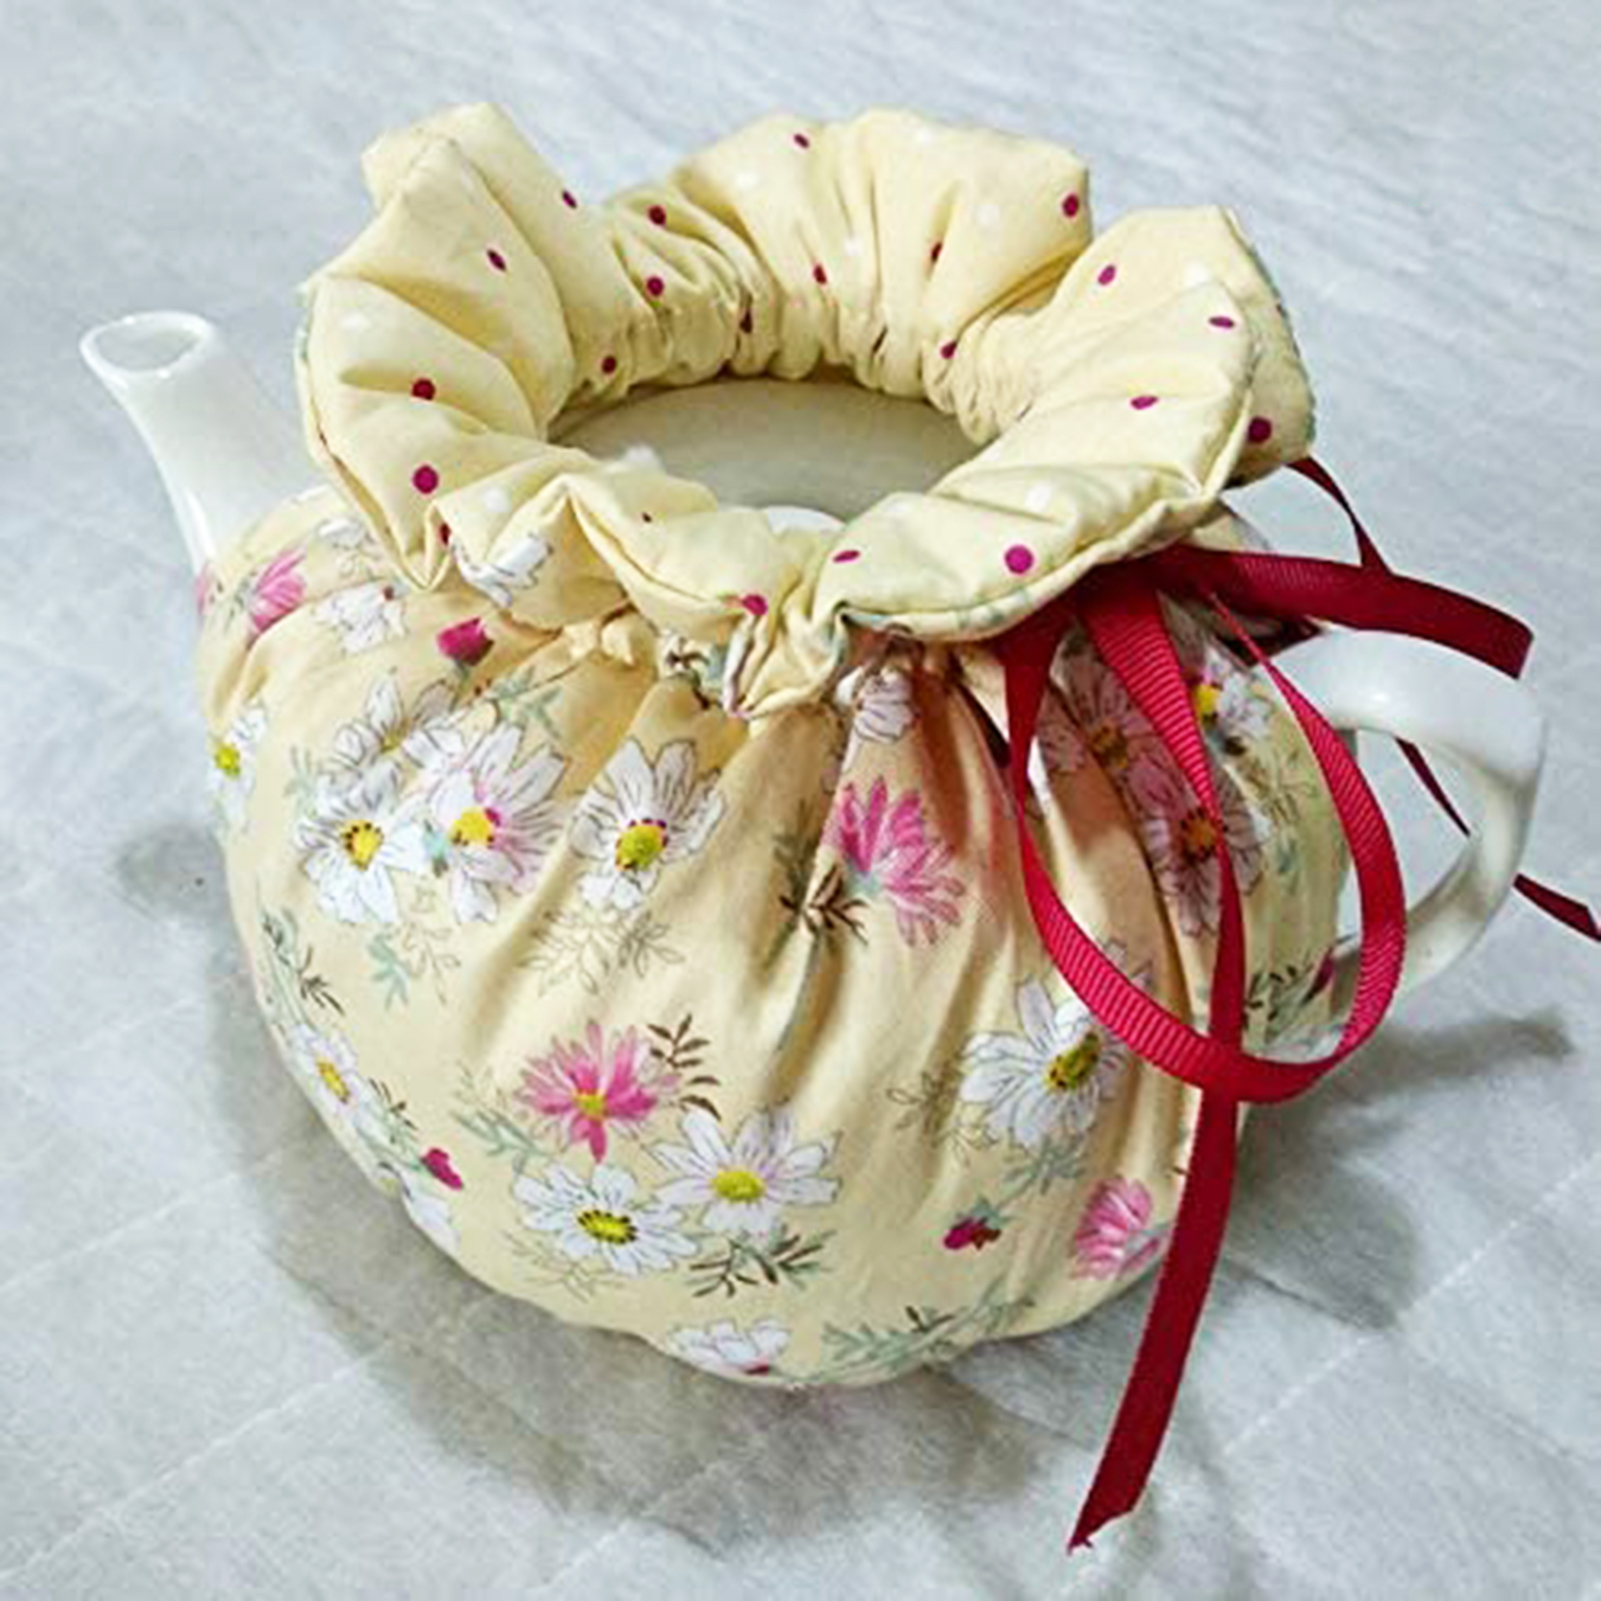 UDIYO 2PCS Tea Cosy, Cotton Vintage Printed Tea Cozy for Tea Pot Dust Cover Insulated Kettle Cover Breakfast Warmer for Home Kitchen Decor - image 4 of 7